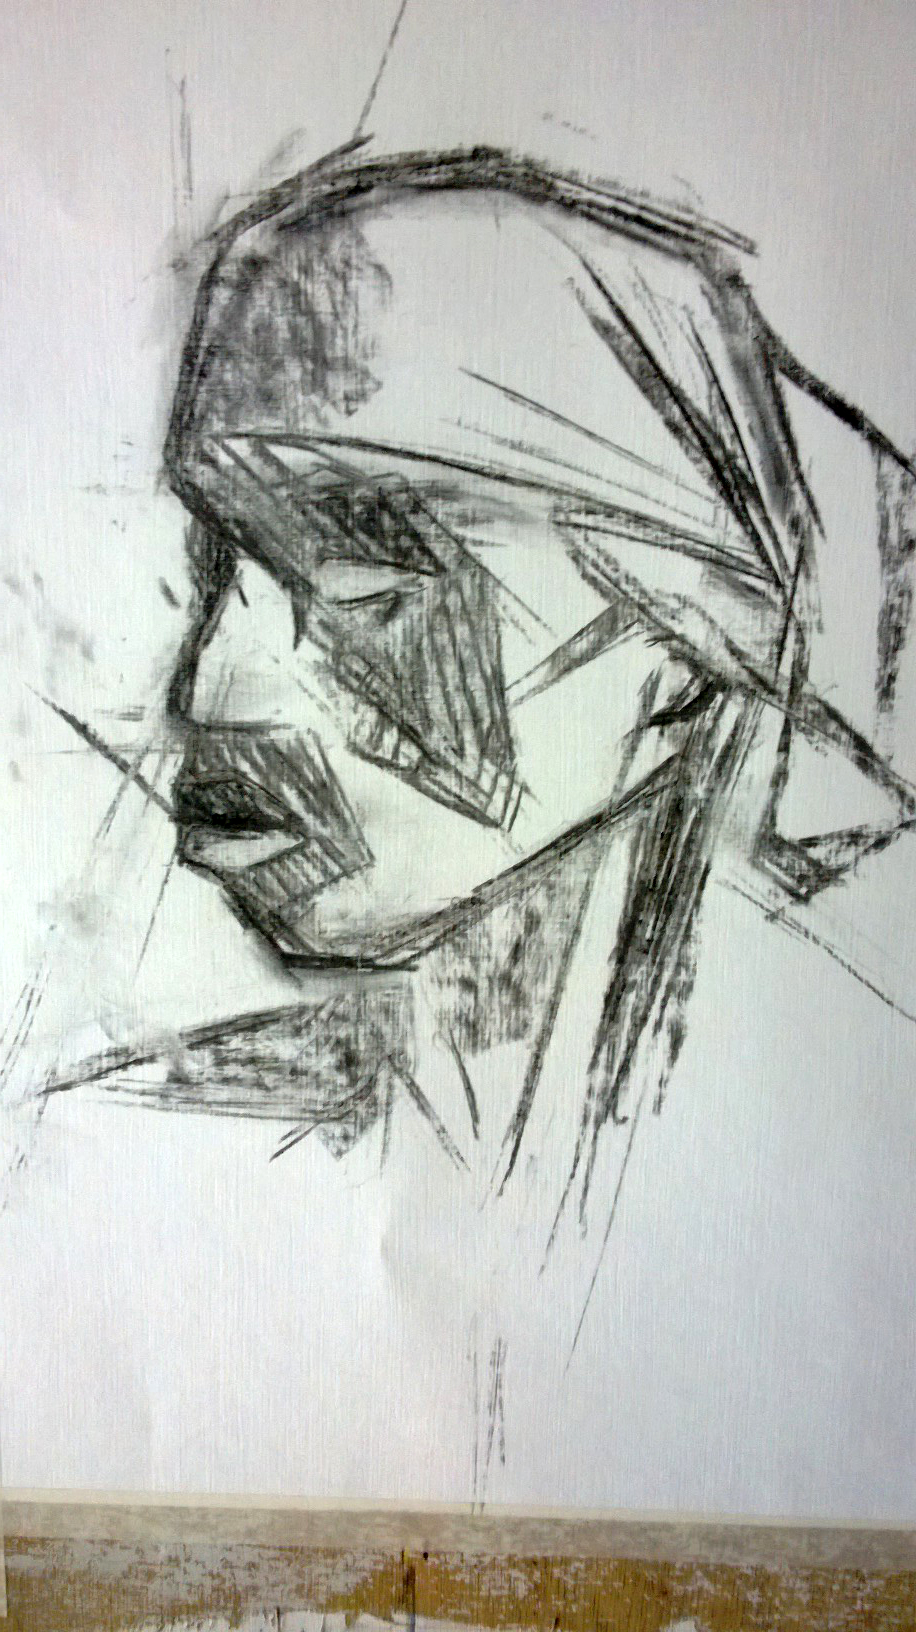 Portraiture: simple sketch in straight lines (charcoal): contour plus edge between light and shade.